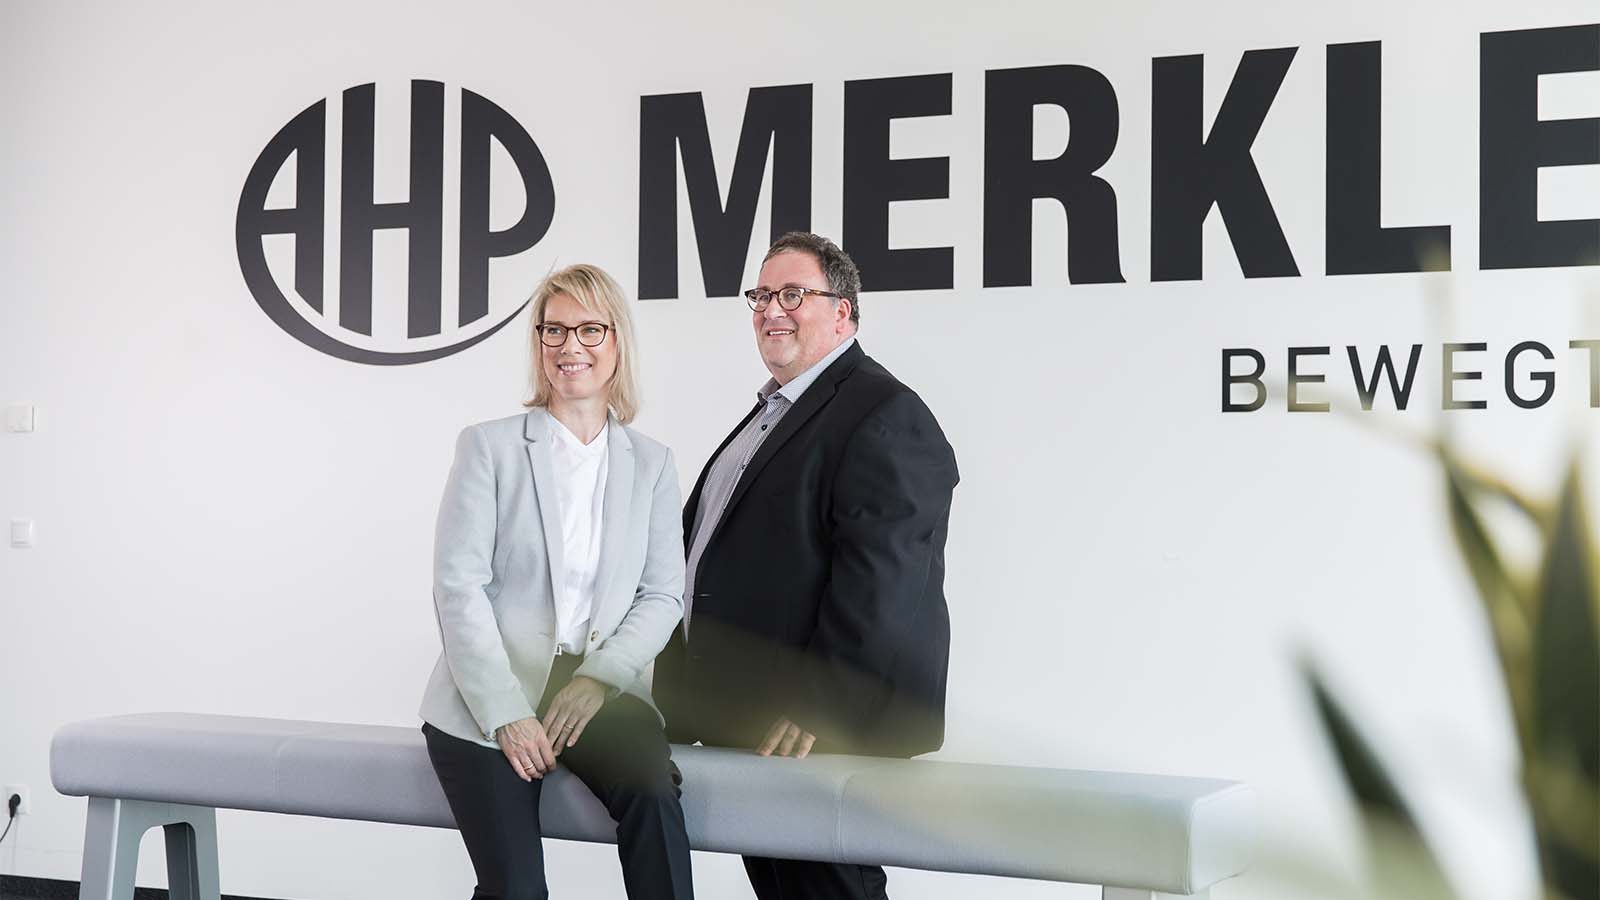 The two managing directors of the company, Katrin Merkle and Christen Merkle